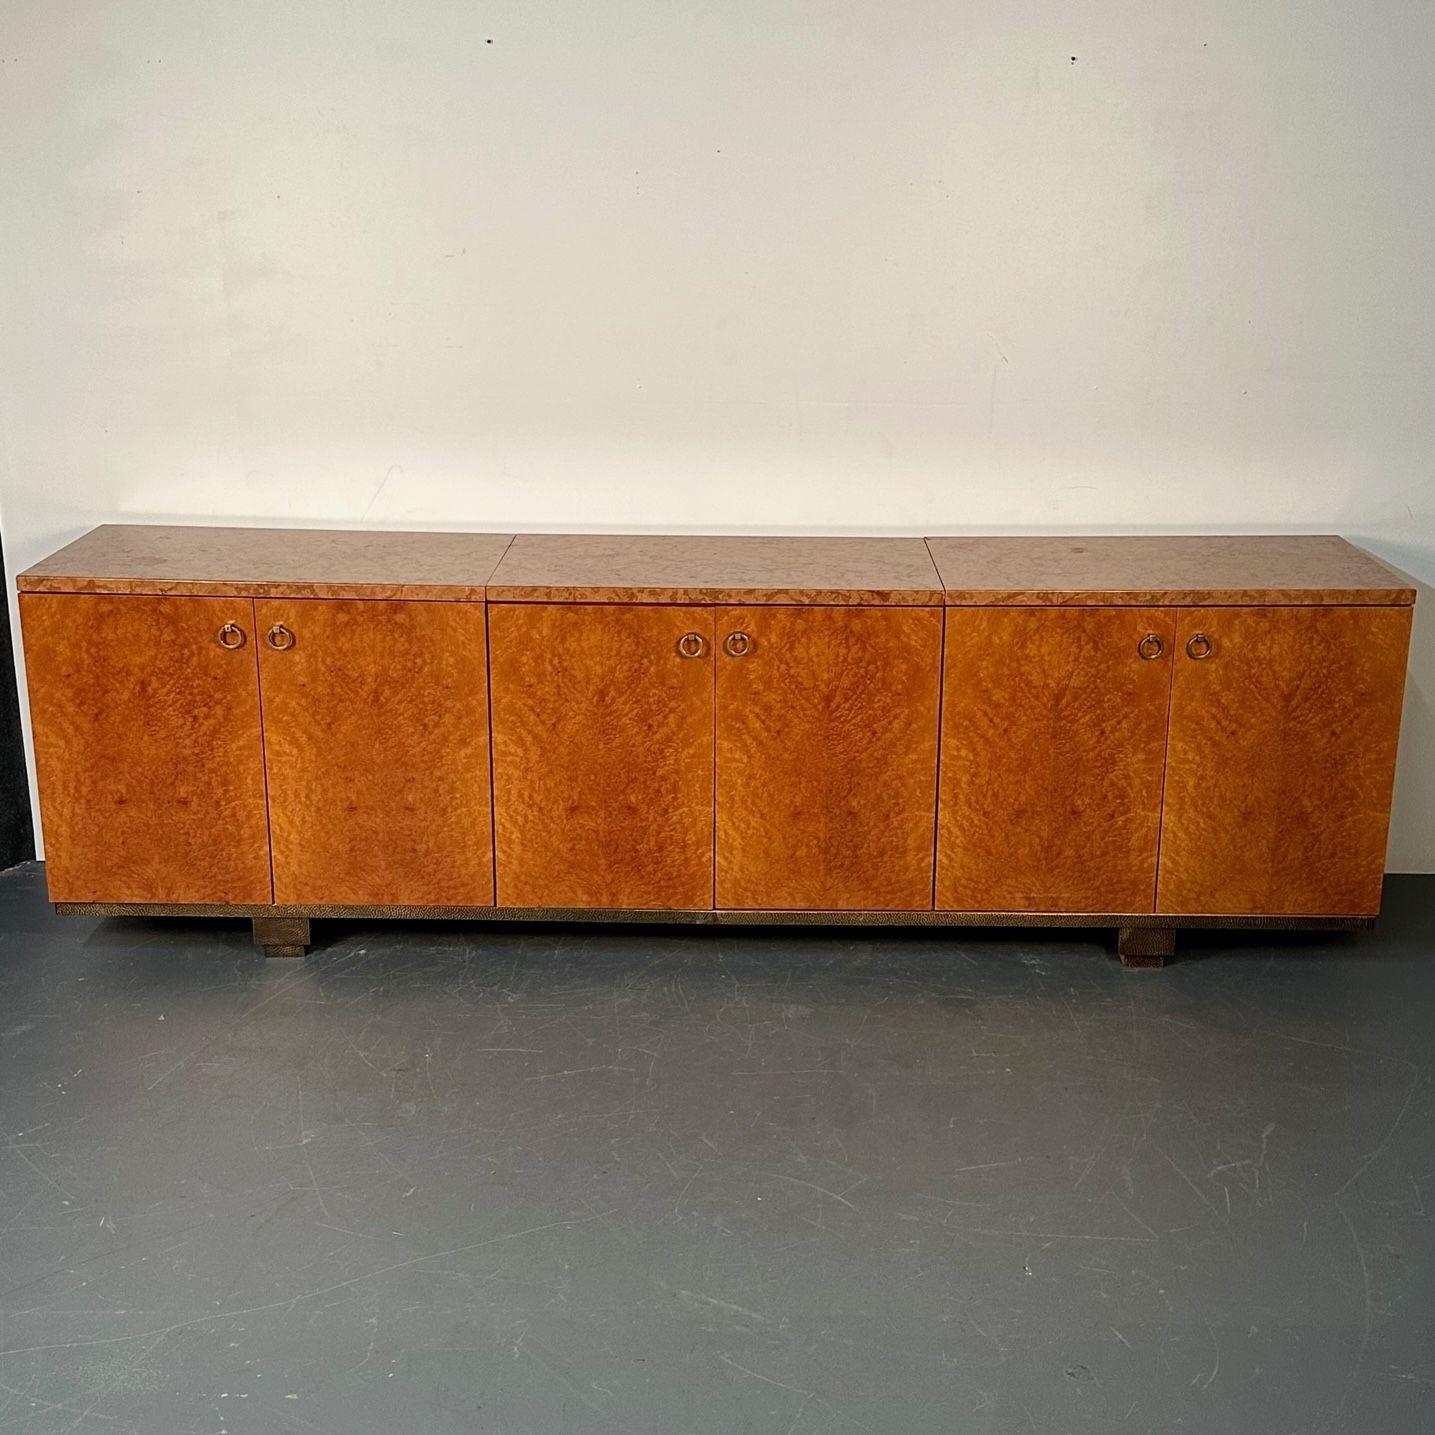 Peter Marino, Modern, Large Custom Sideboard, Maple, Marble, Brass, Canada In Good Condition For Sale In Stamford, CT